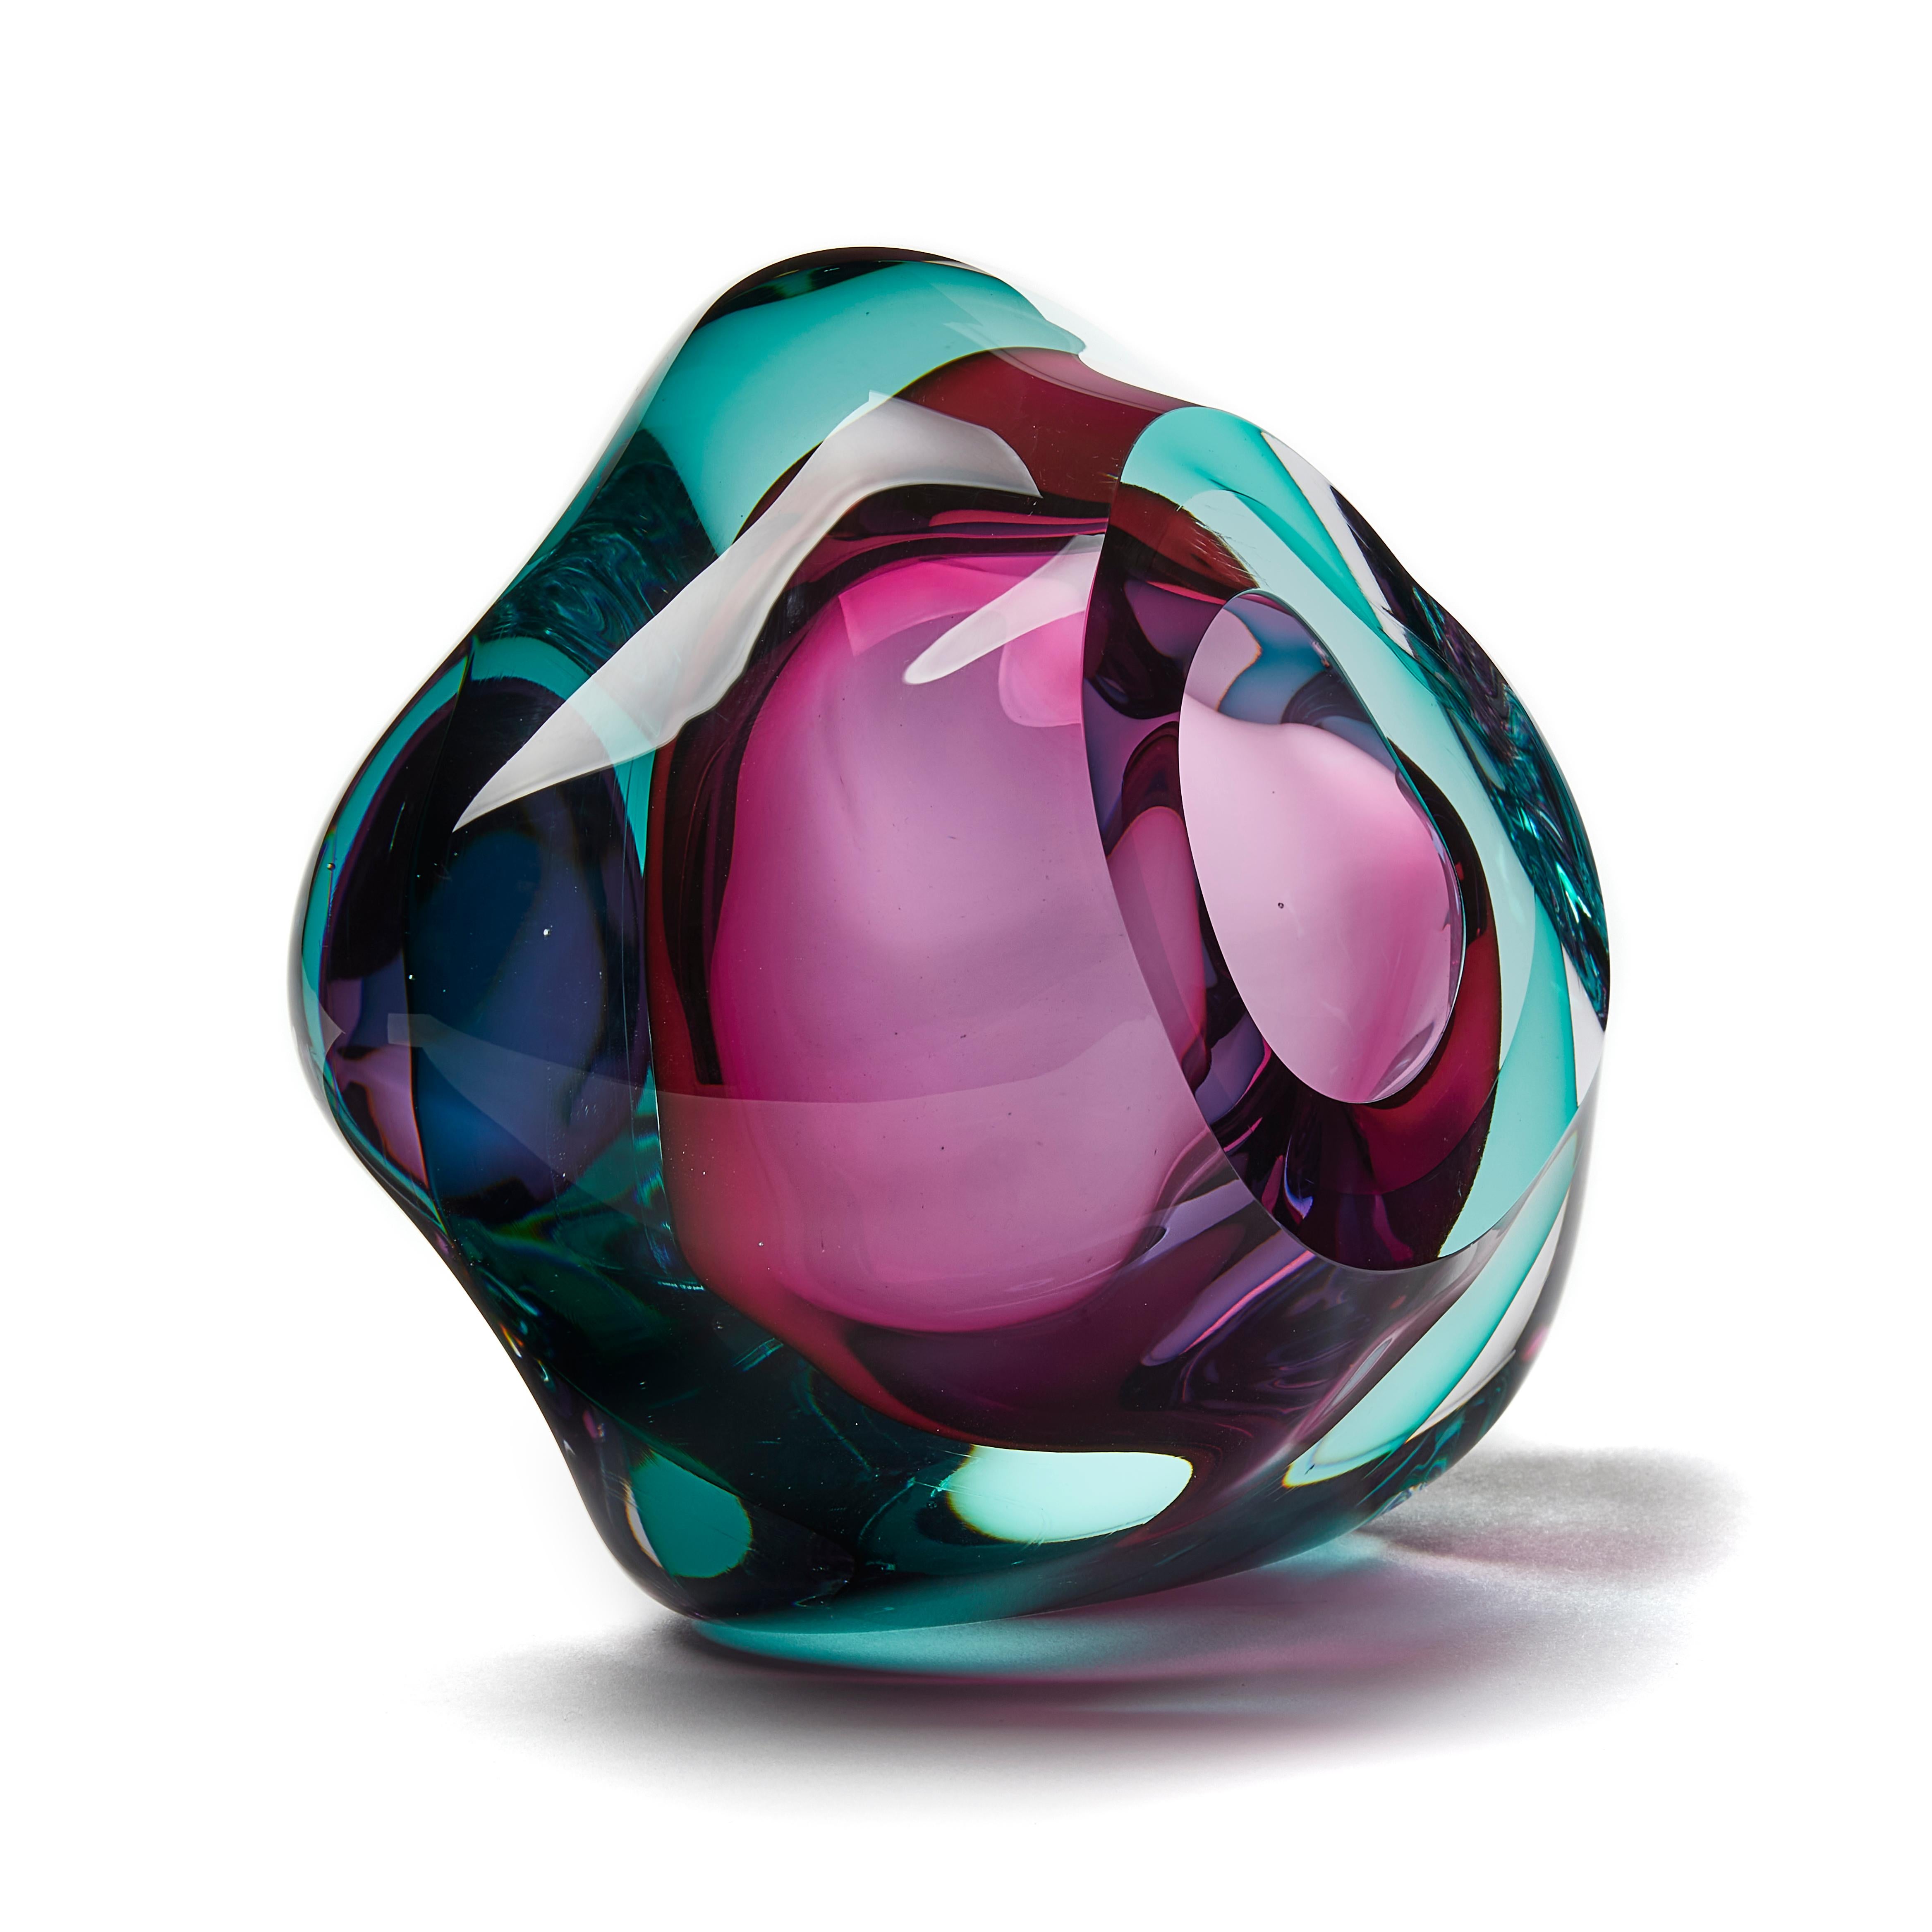 Vug in Emerald and Fuchsia is a unique hand blown sculpture by the British artist Samantha Donaldson. Created by layers of colored glass in soft emerald green and vibrant pink, the transparent colors merge and create further hues throughout the